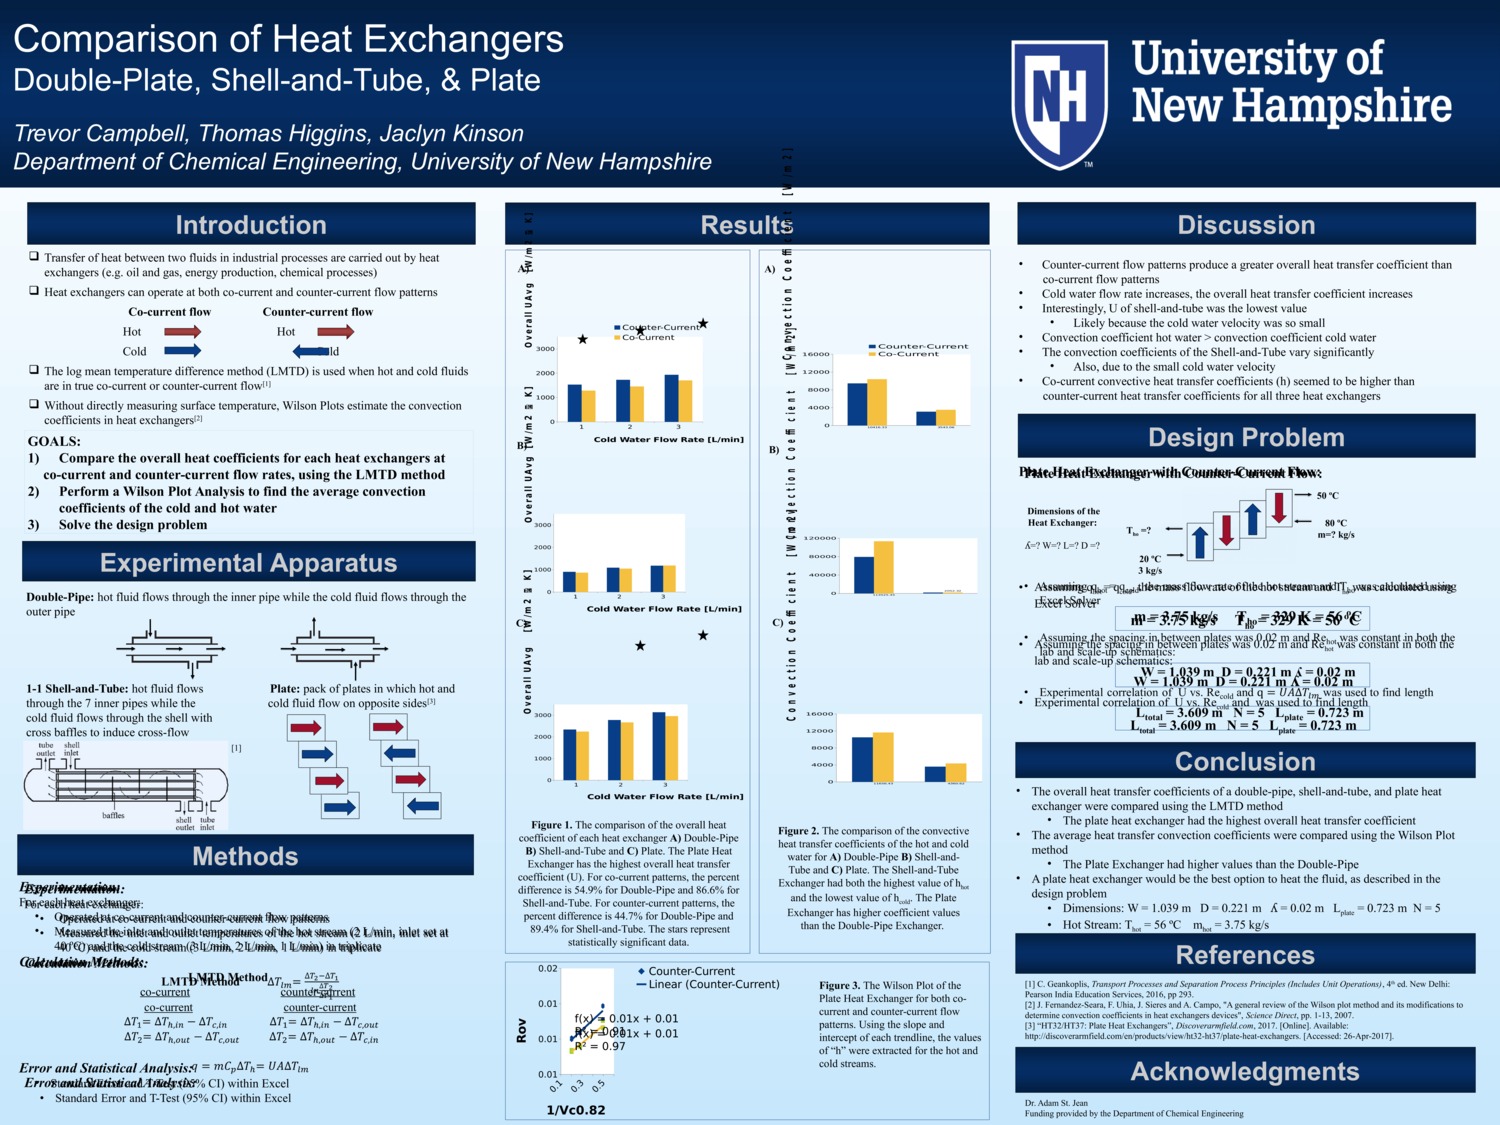 Comparison Of Heat Exchangers by jrk2001